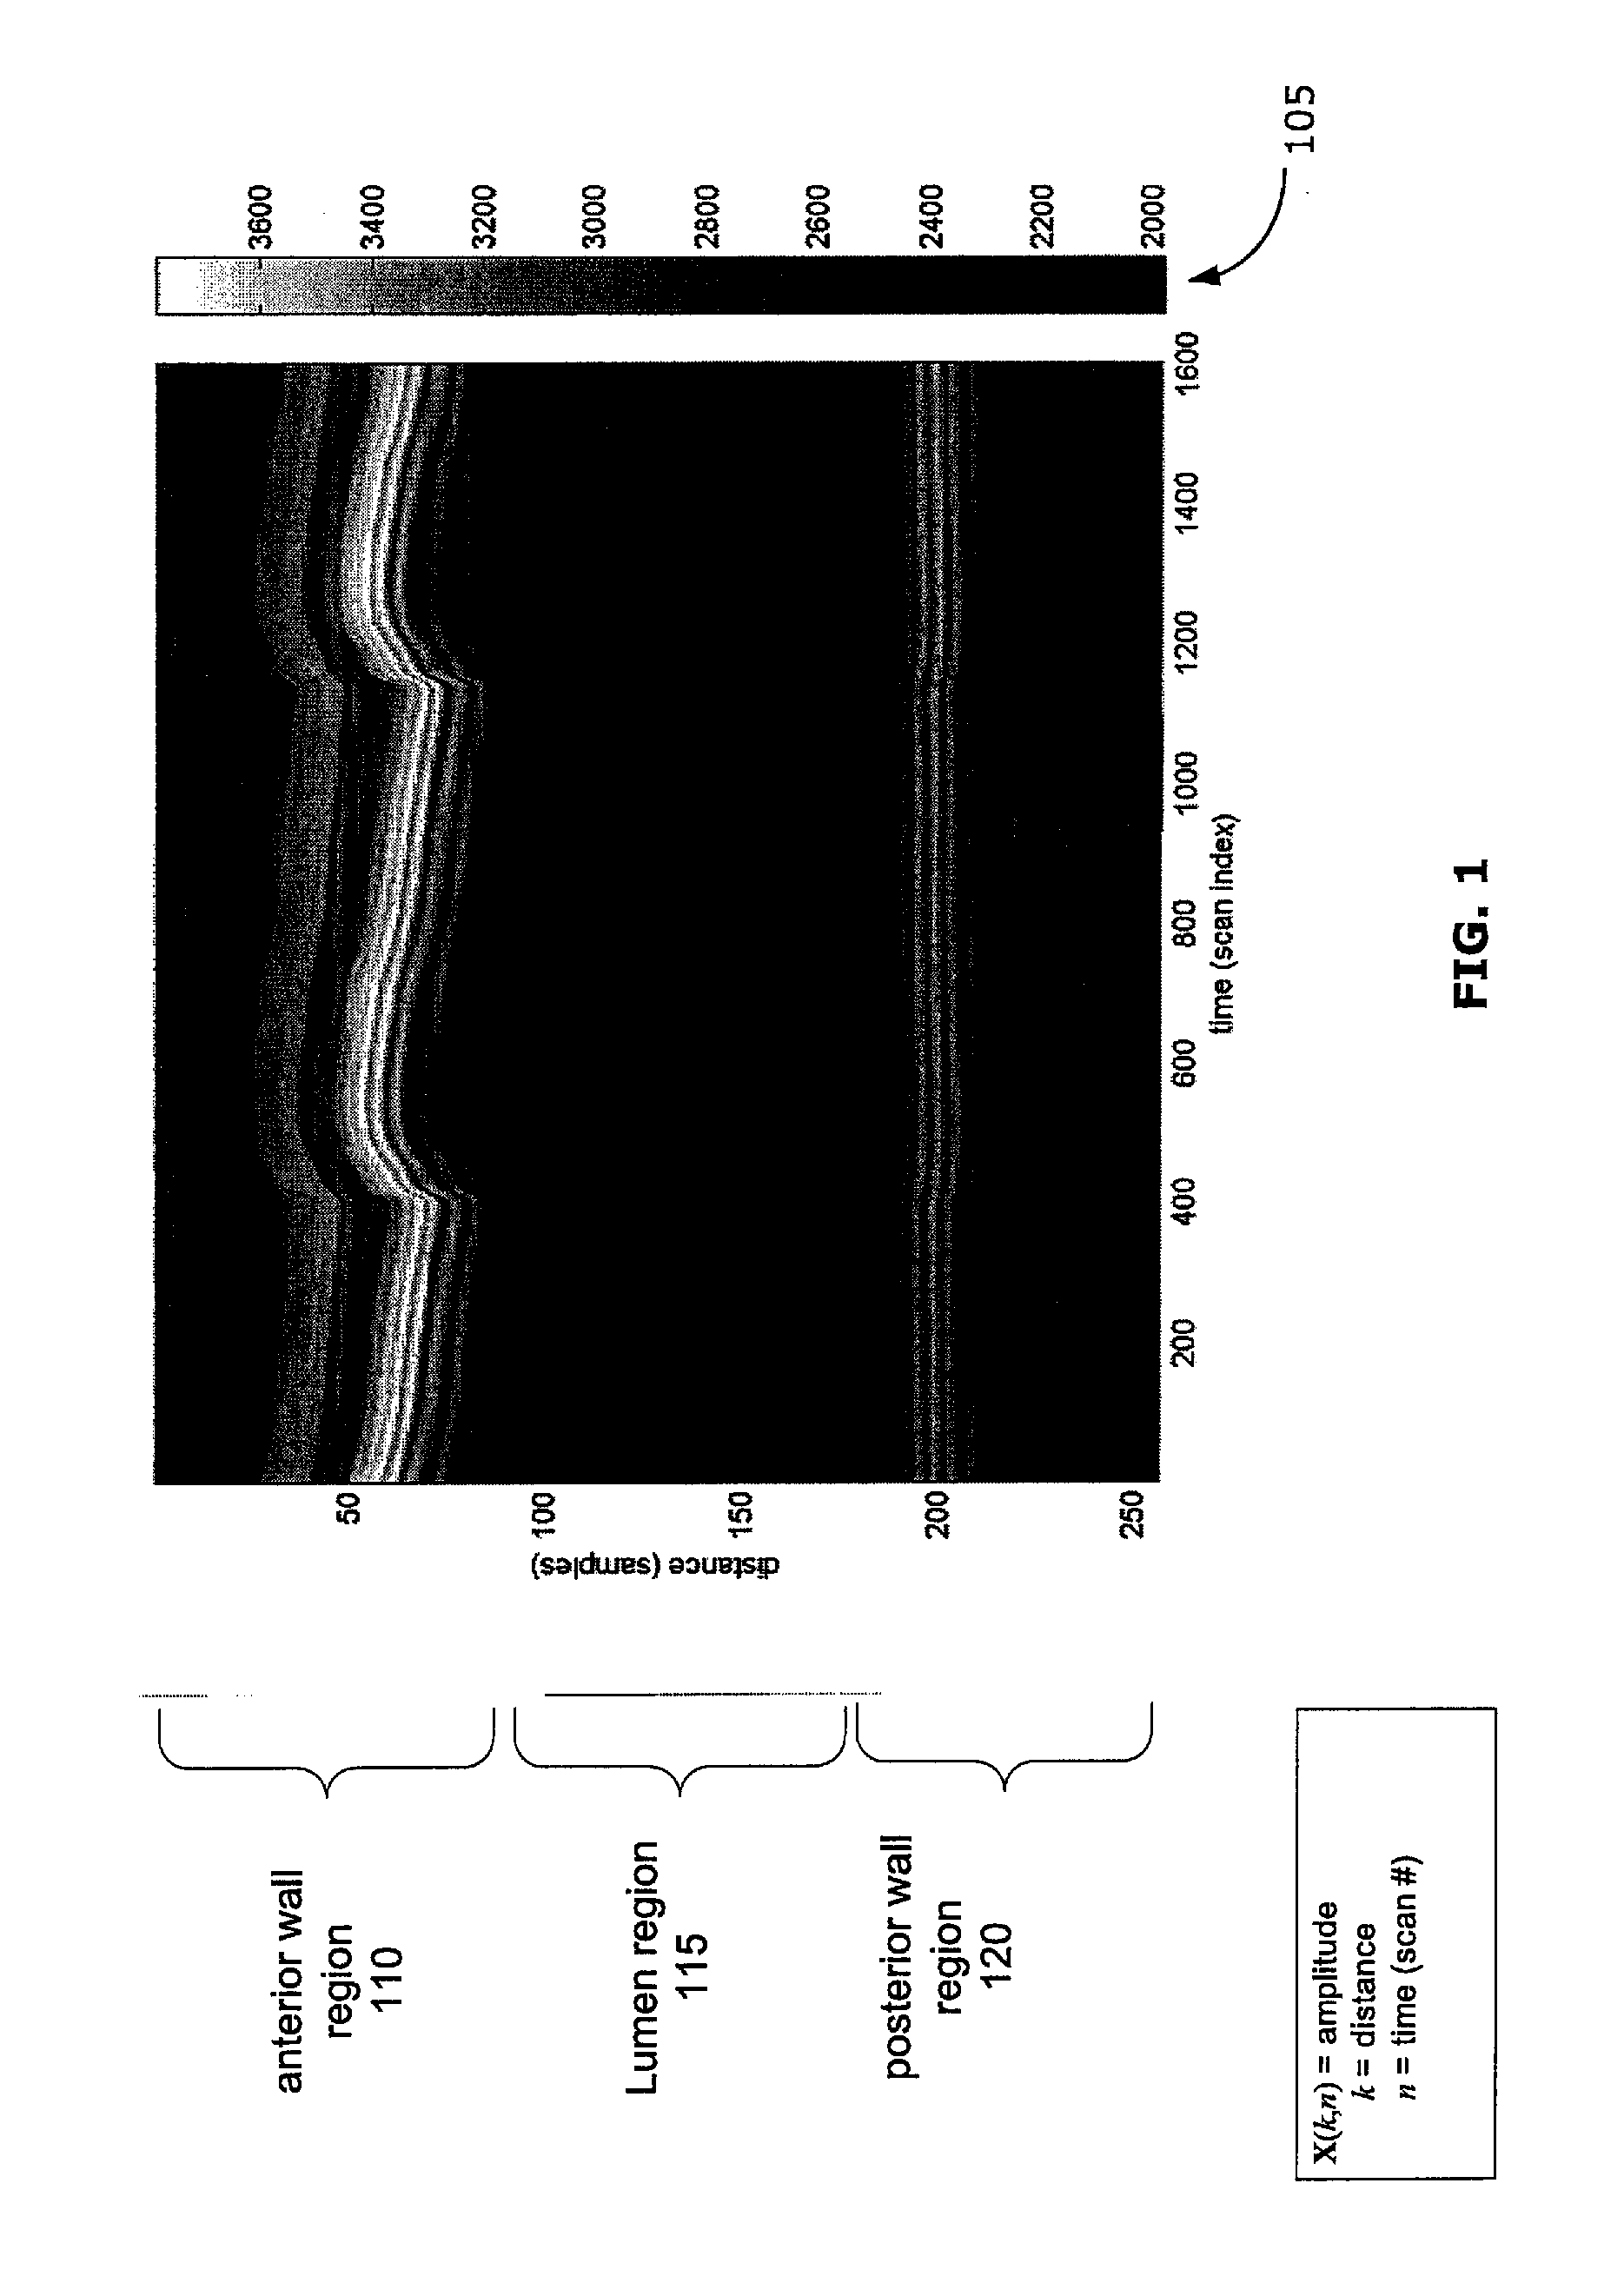 System and method for segmenting m-mode ultrasound images showing blood vessel wall motion over time